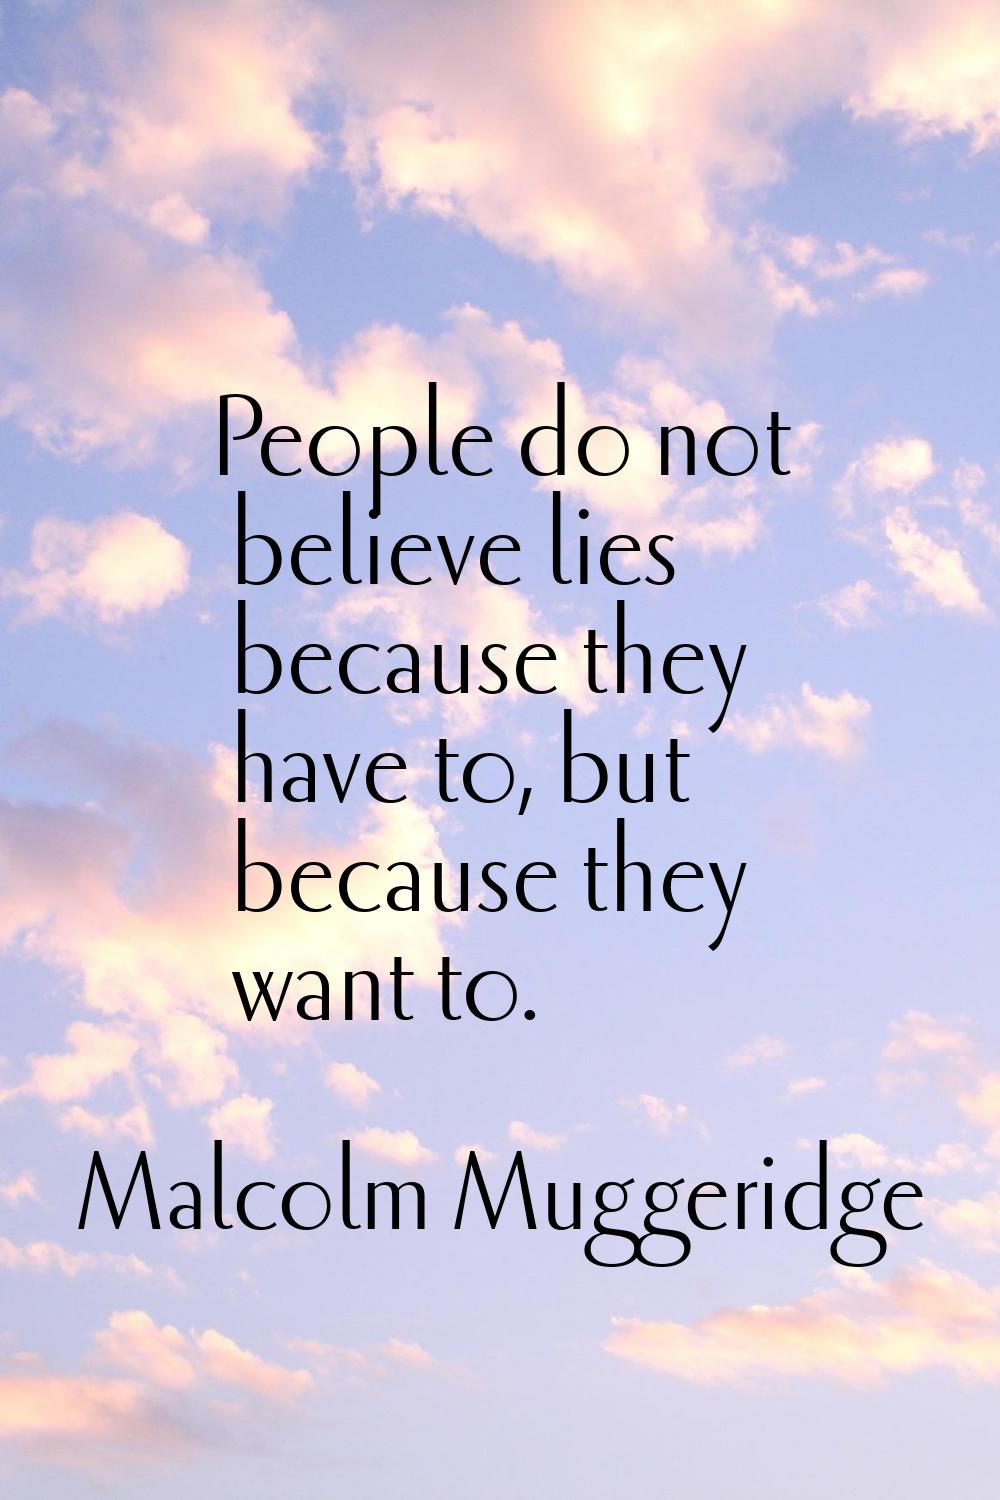 People do not believe lies because they have to, but because they want to.